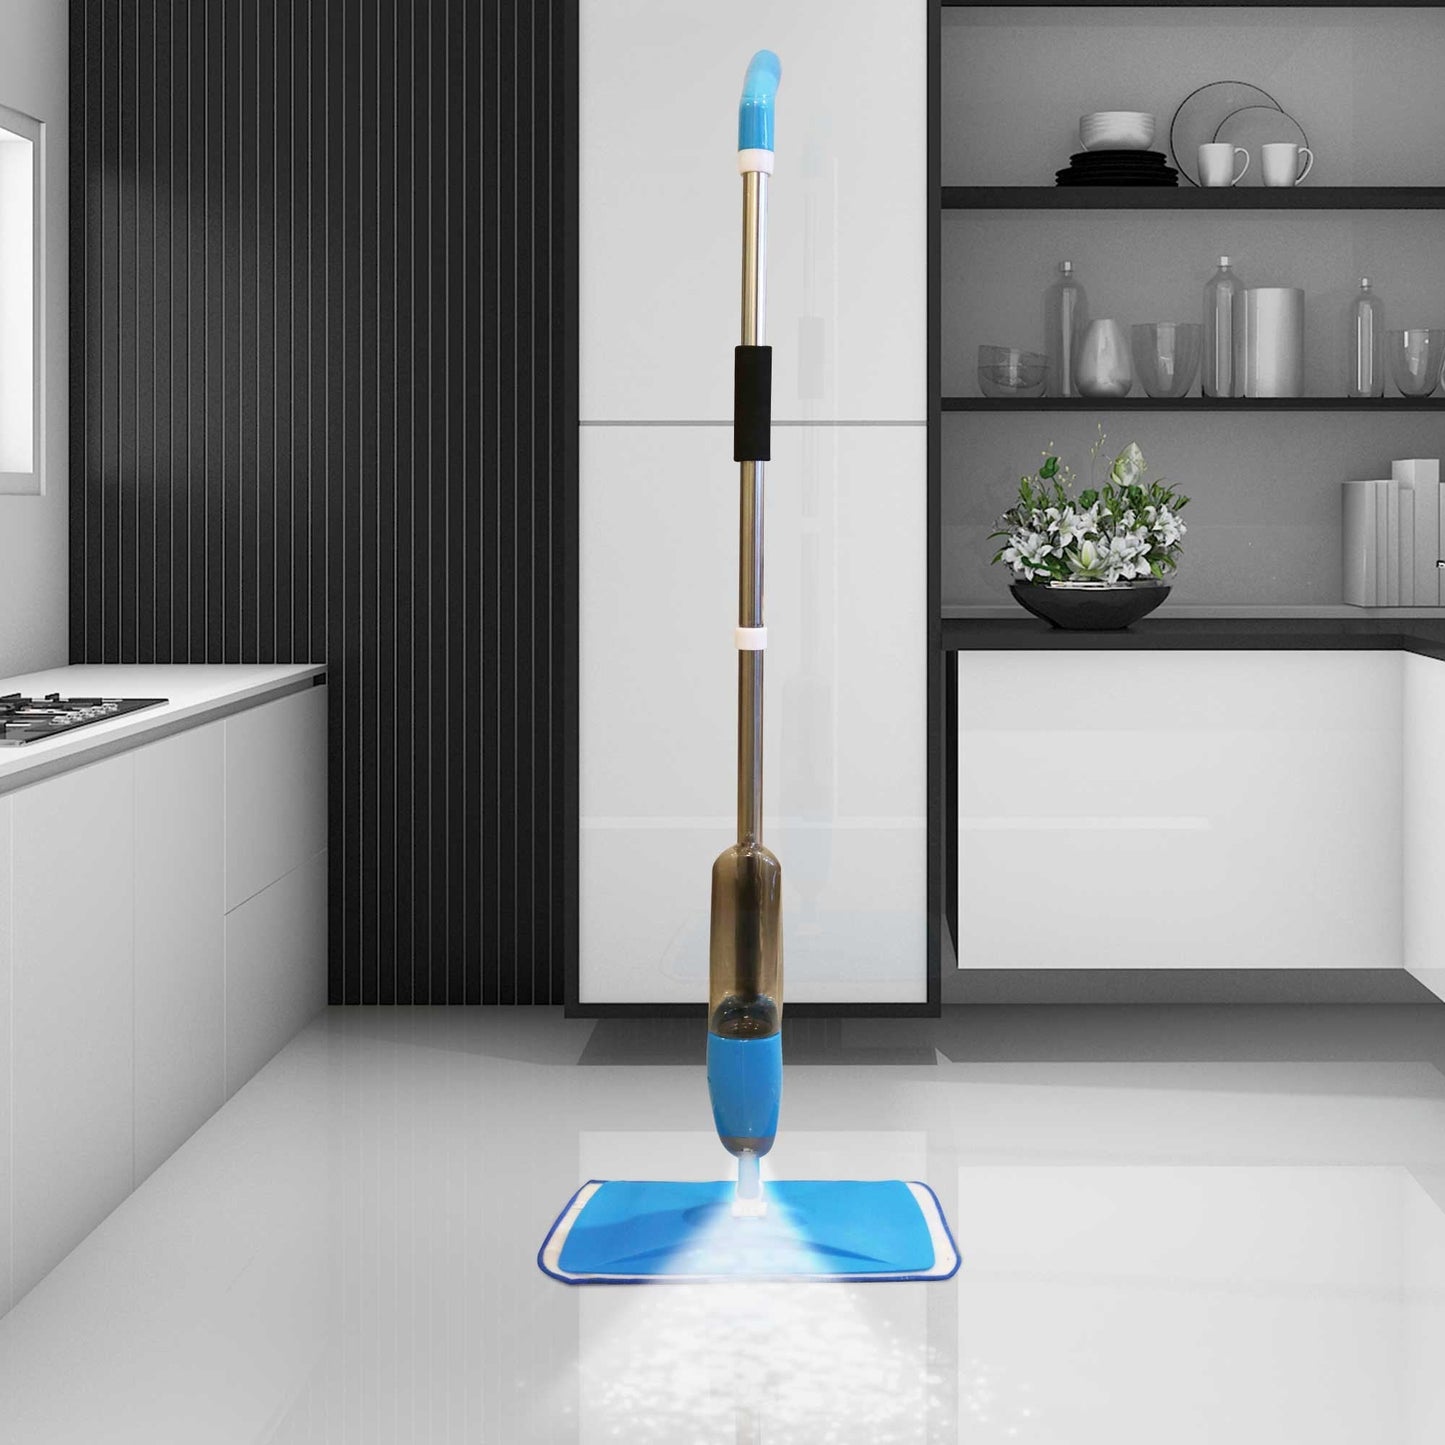 Spray Mop Blue Cleaning Water Spraying Refillable Bottle Kitchen Tile Flooring Cleaner Mop